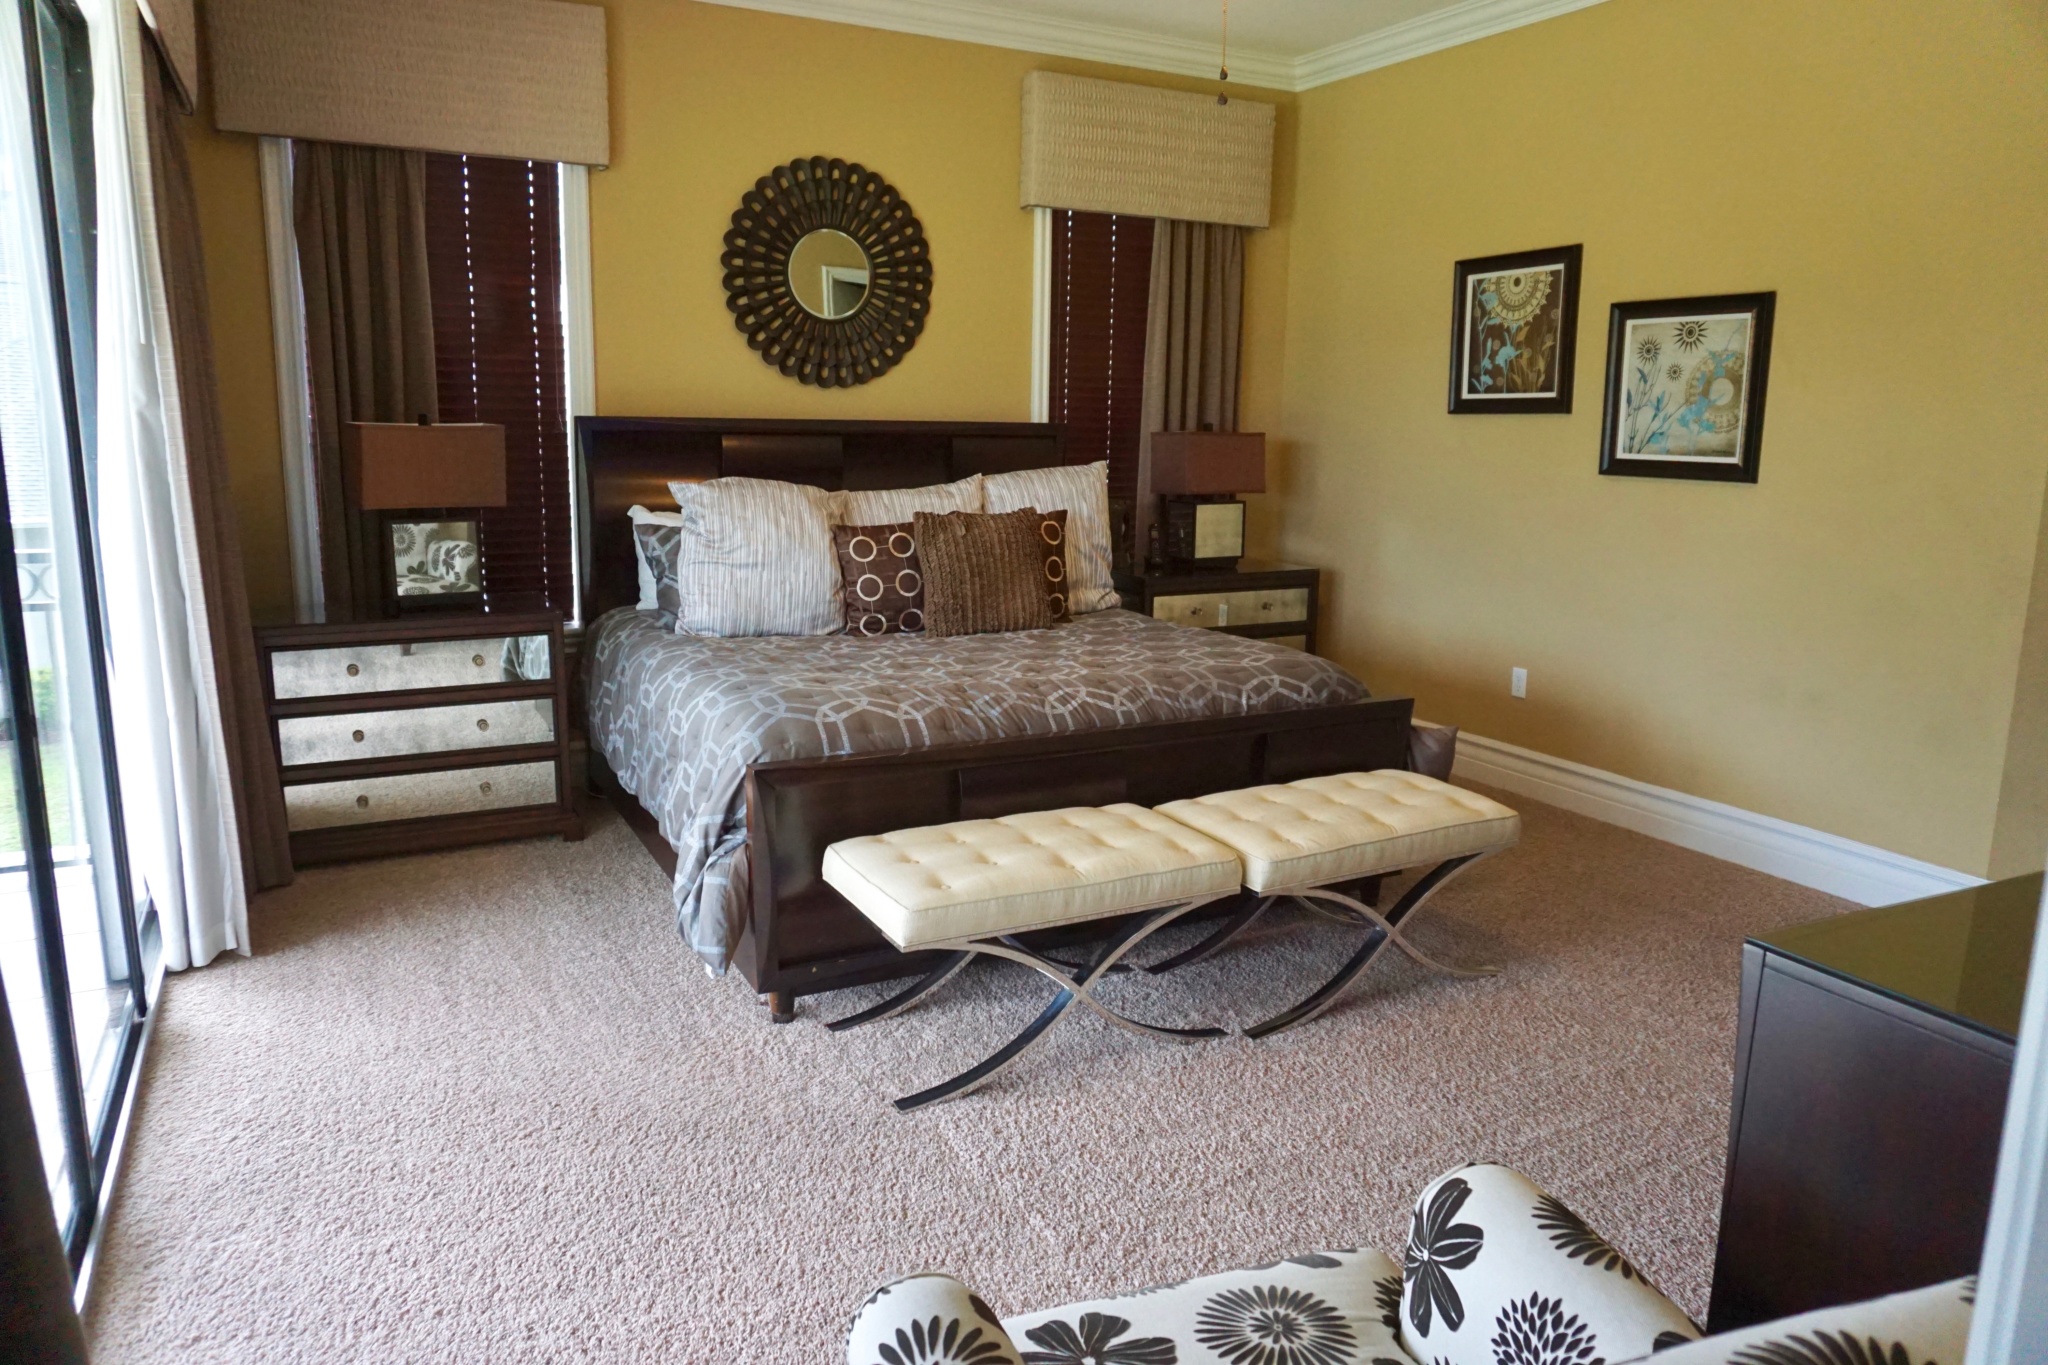 Reunion Resort Luxury Vacation Homes: The Best Way to Stay in Orlando